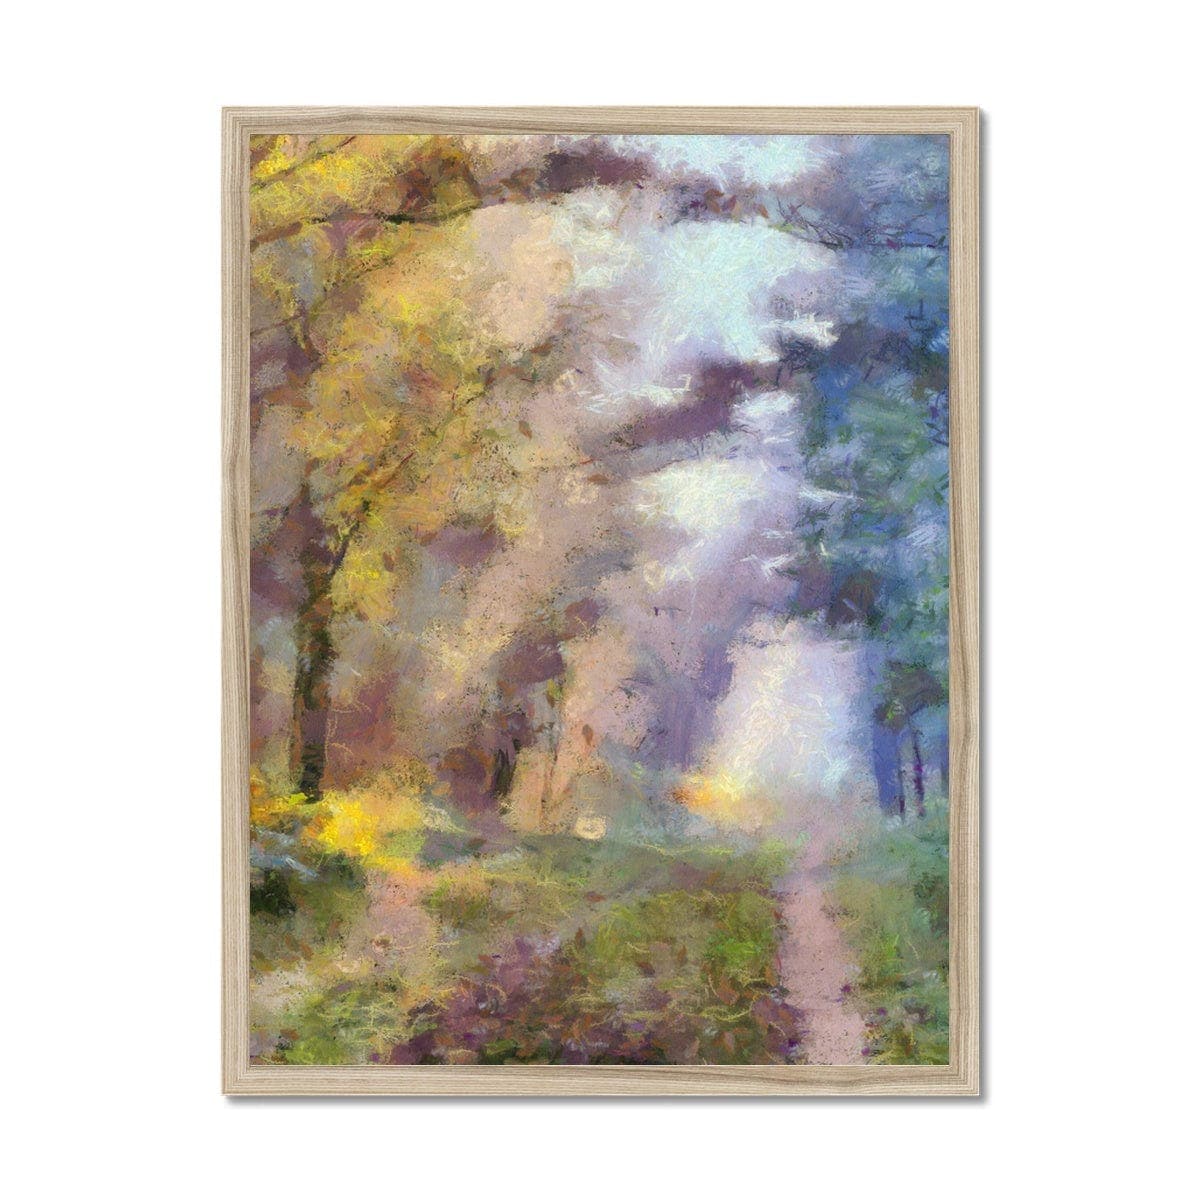 Early Morning Strole in the Woods Framed Print